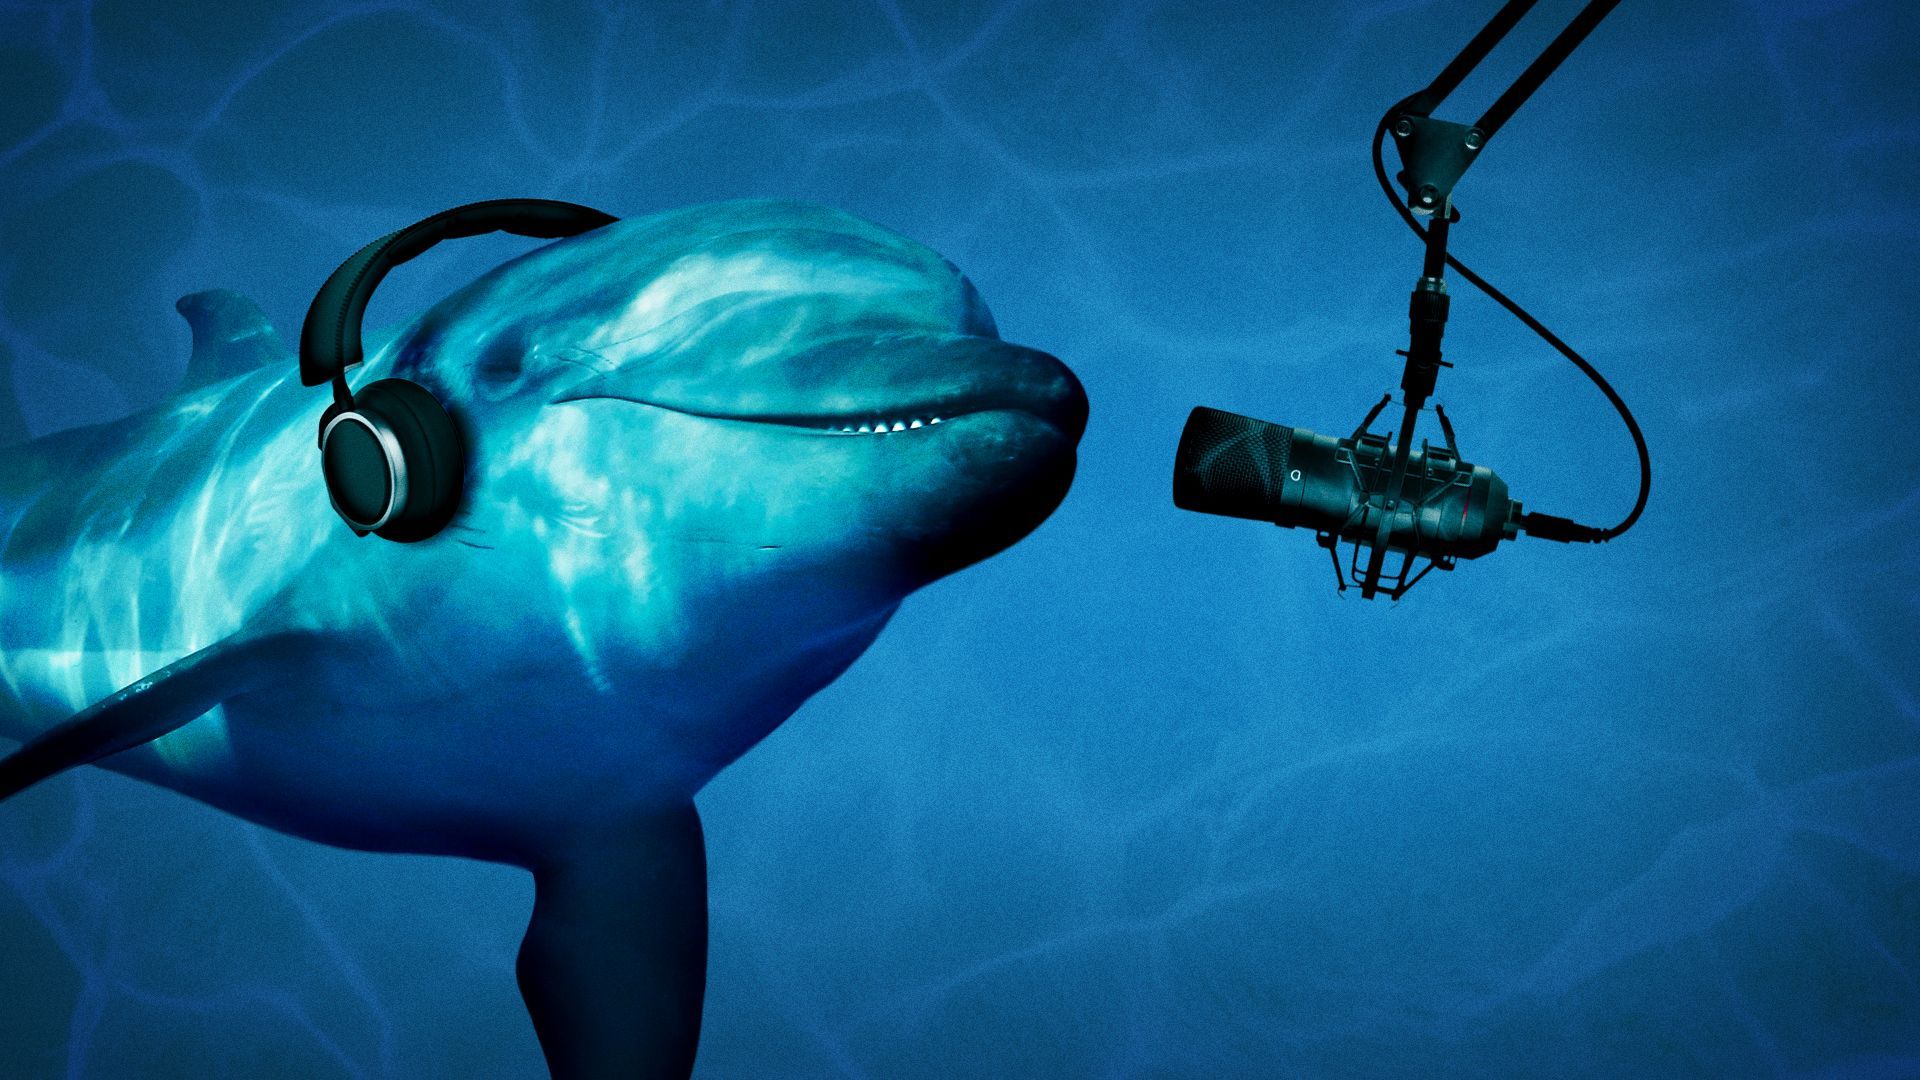 Illustration of a dolphin wearing podcasting equipment.